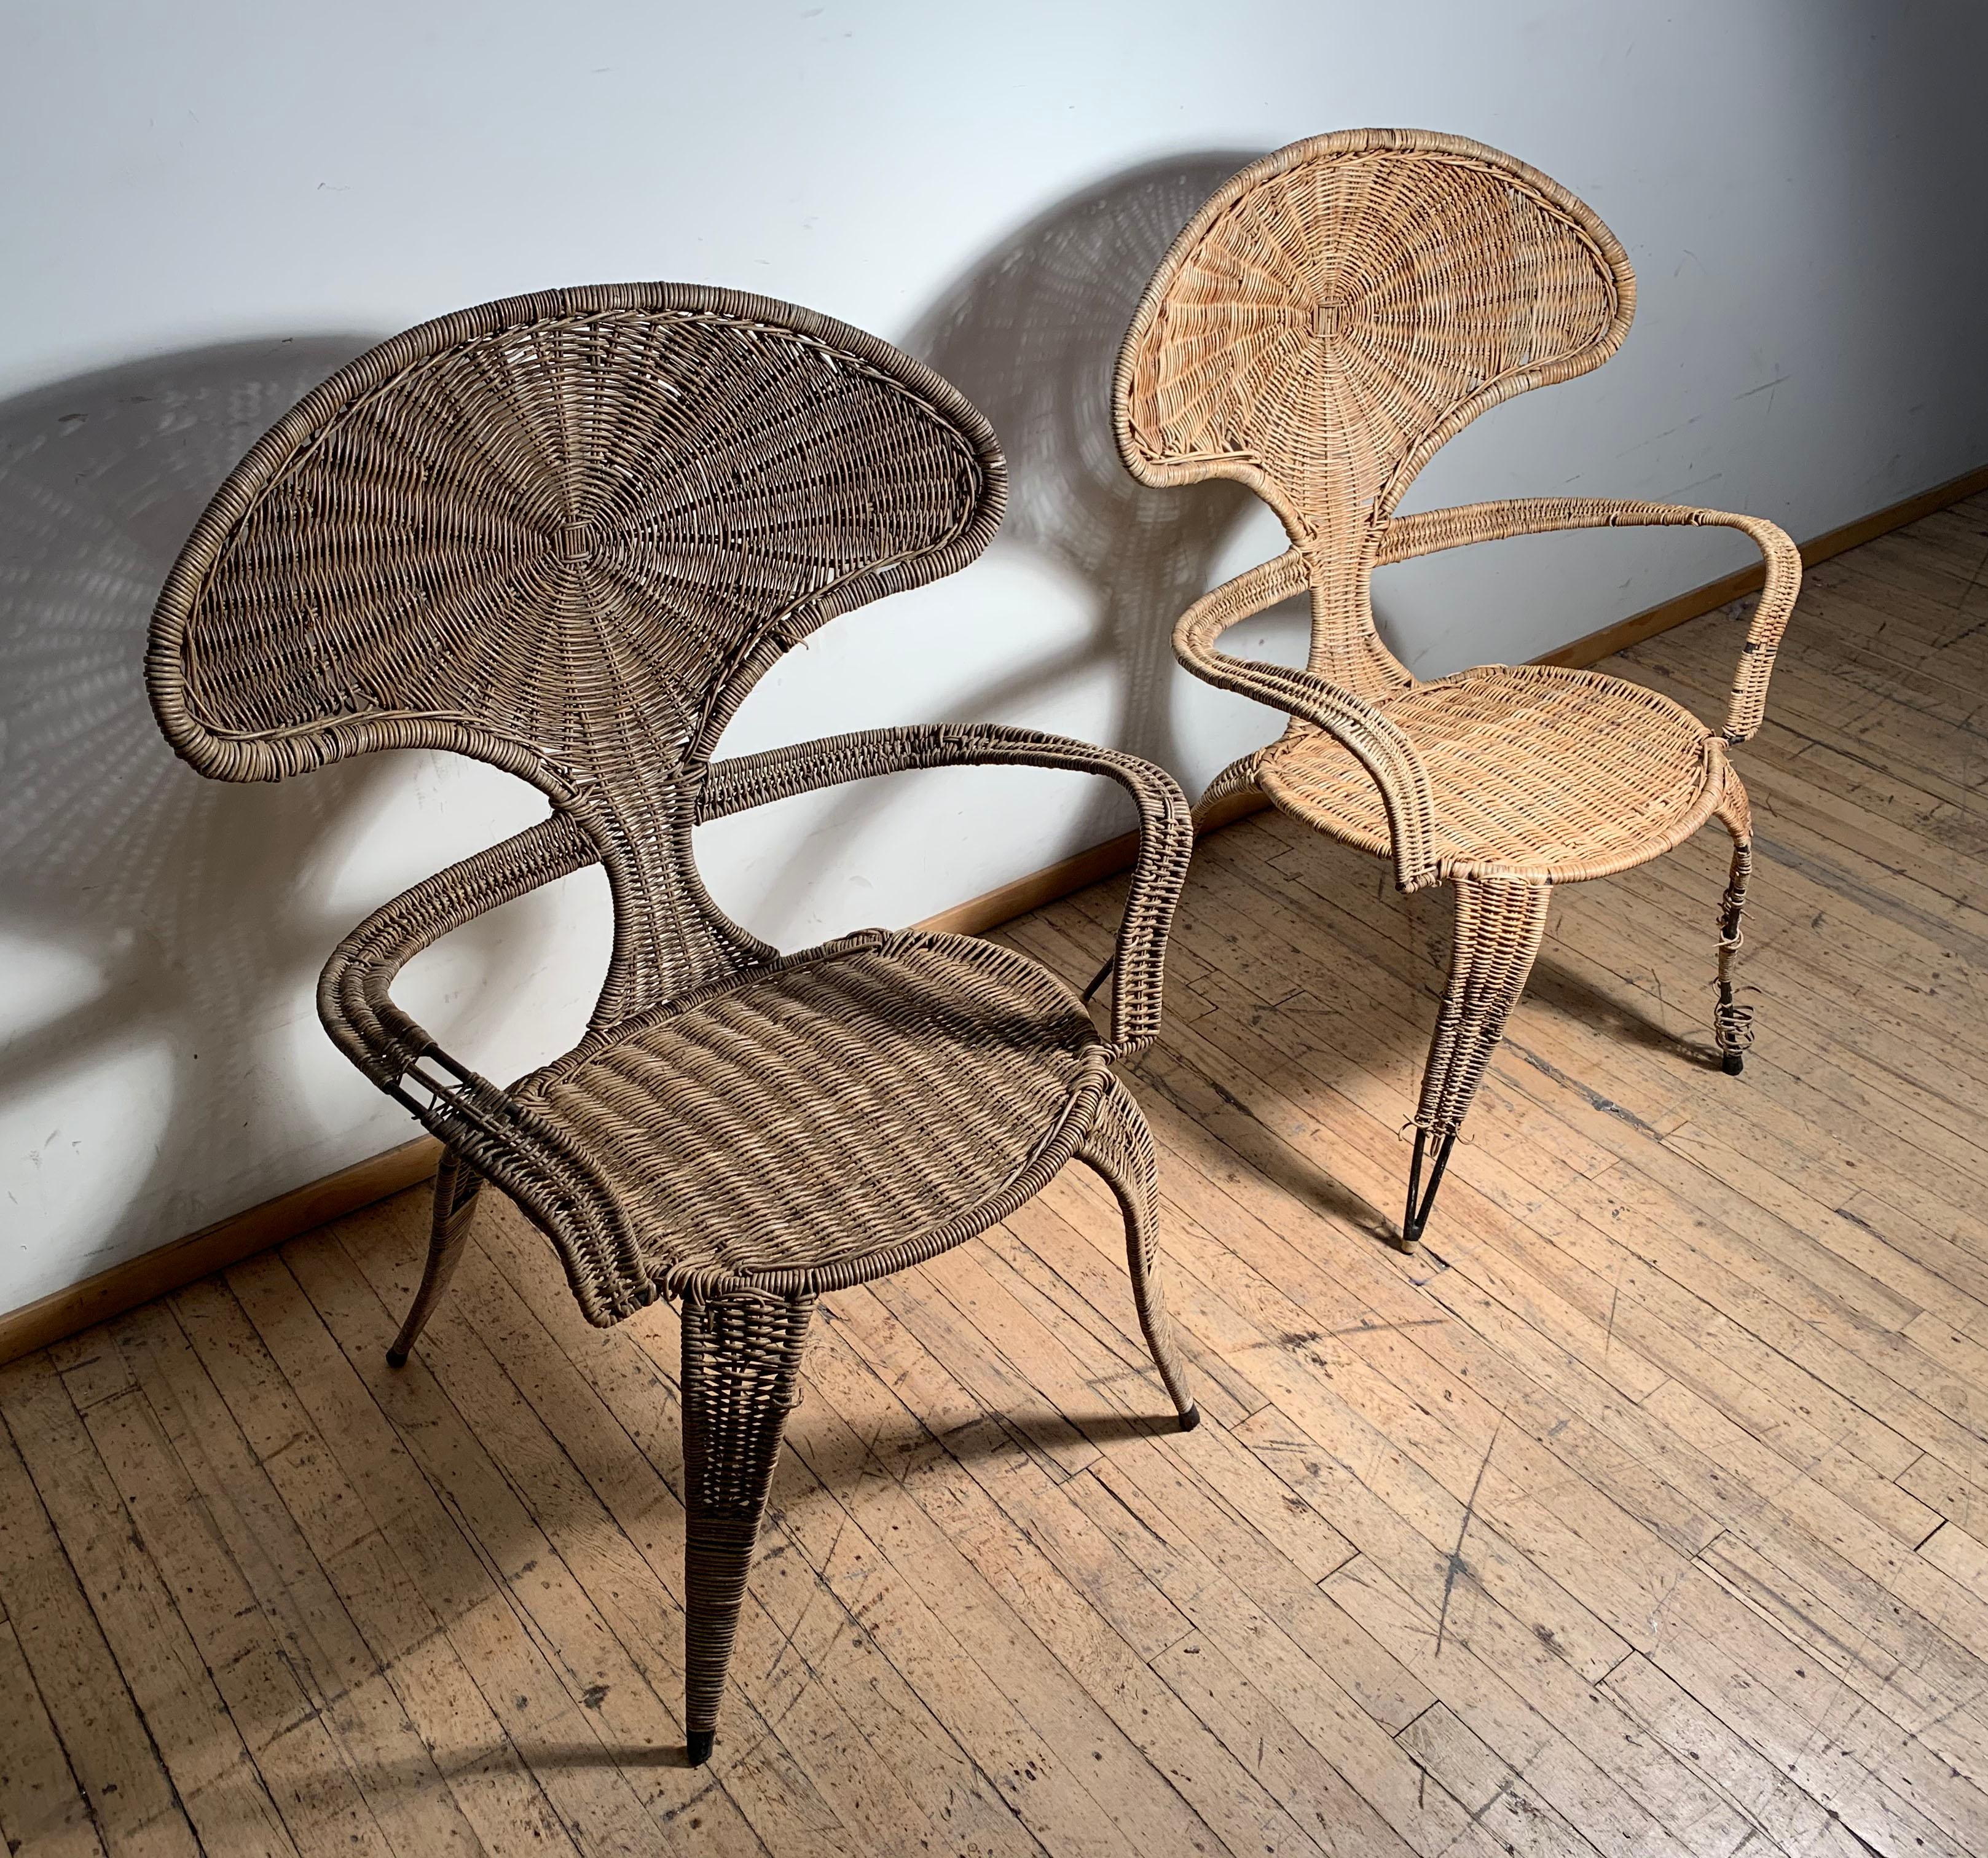 Tropi-Cal Danny Ho Fong and Miller Fong Garden Patio Pair of Chairs In Good Condition For Sale In Chicago, IL